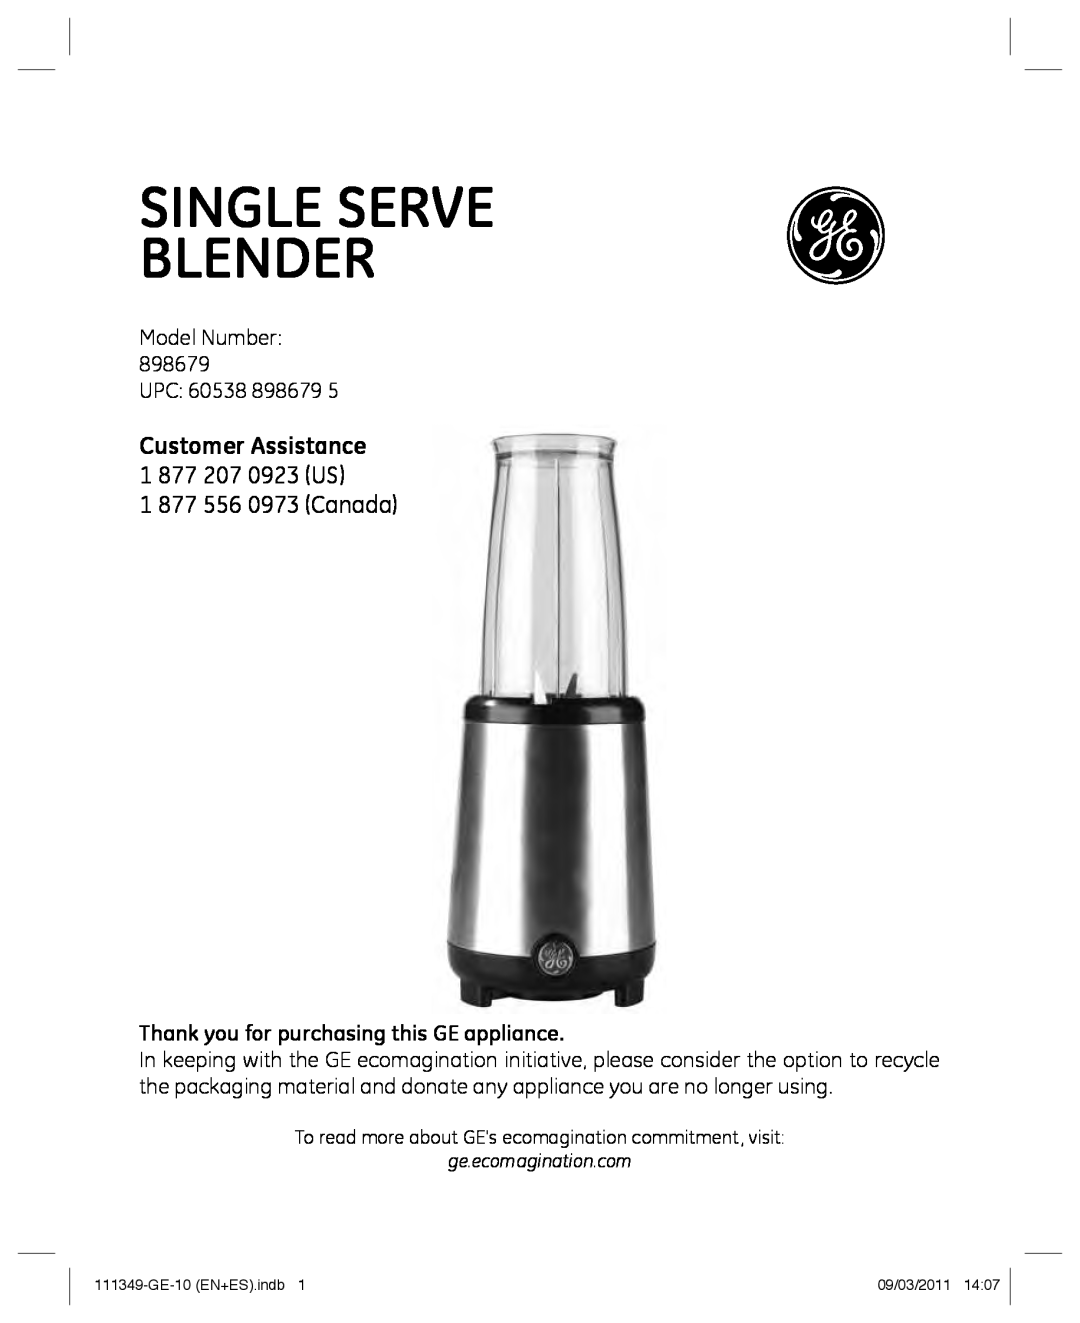 GE 898679 manual Customer Assistance 1 877 207 0923 US, Thank you for purchasing this GE appliance, Single serve blender 